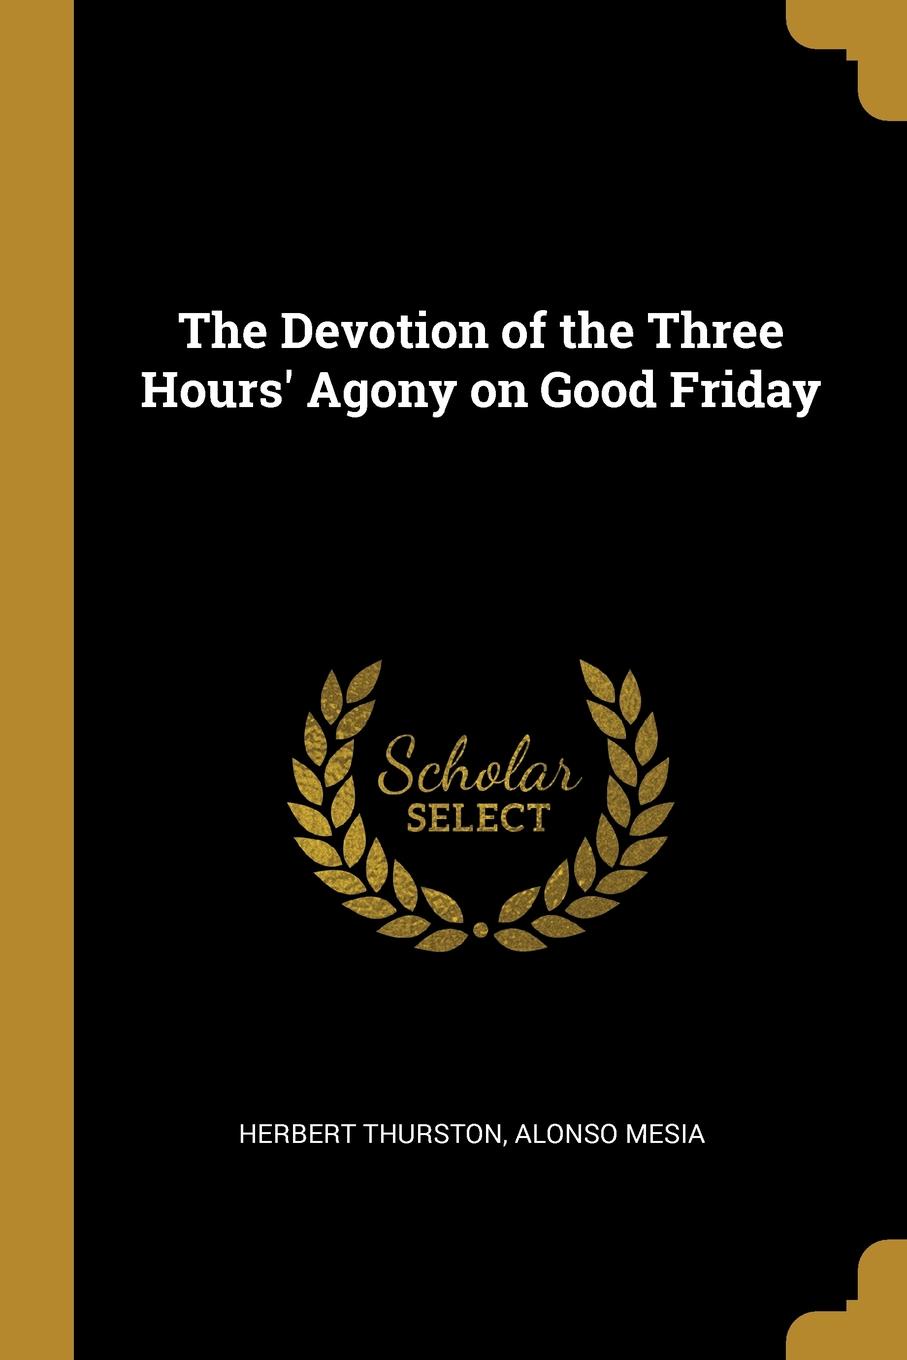 The Devotion of the Three Hours. Agony on Good Friday